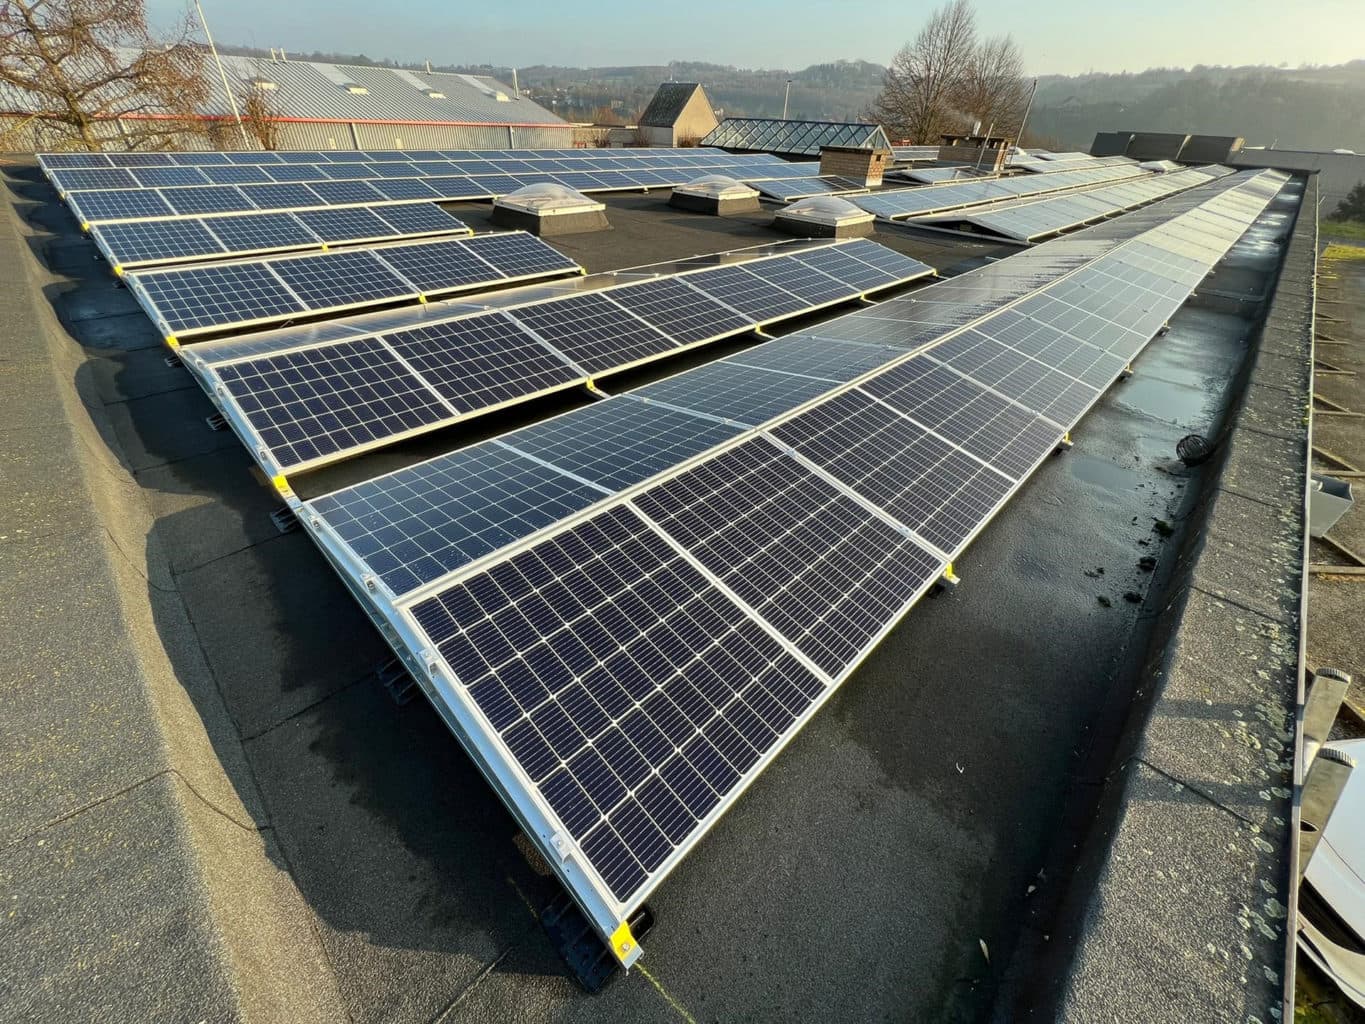 Some news about our installation of photovoltaic panels on the roof of the Belgian factory